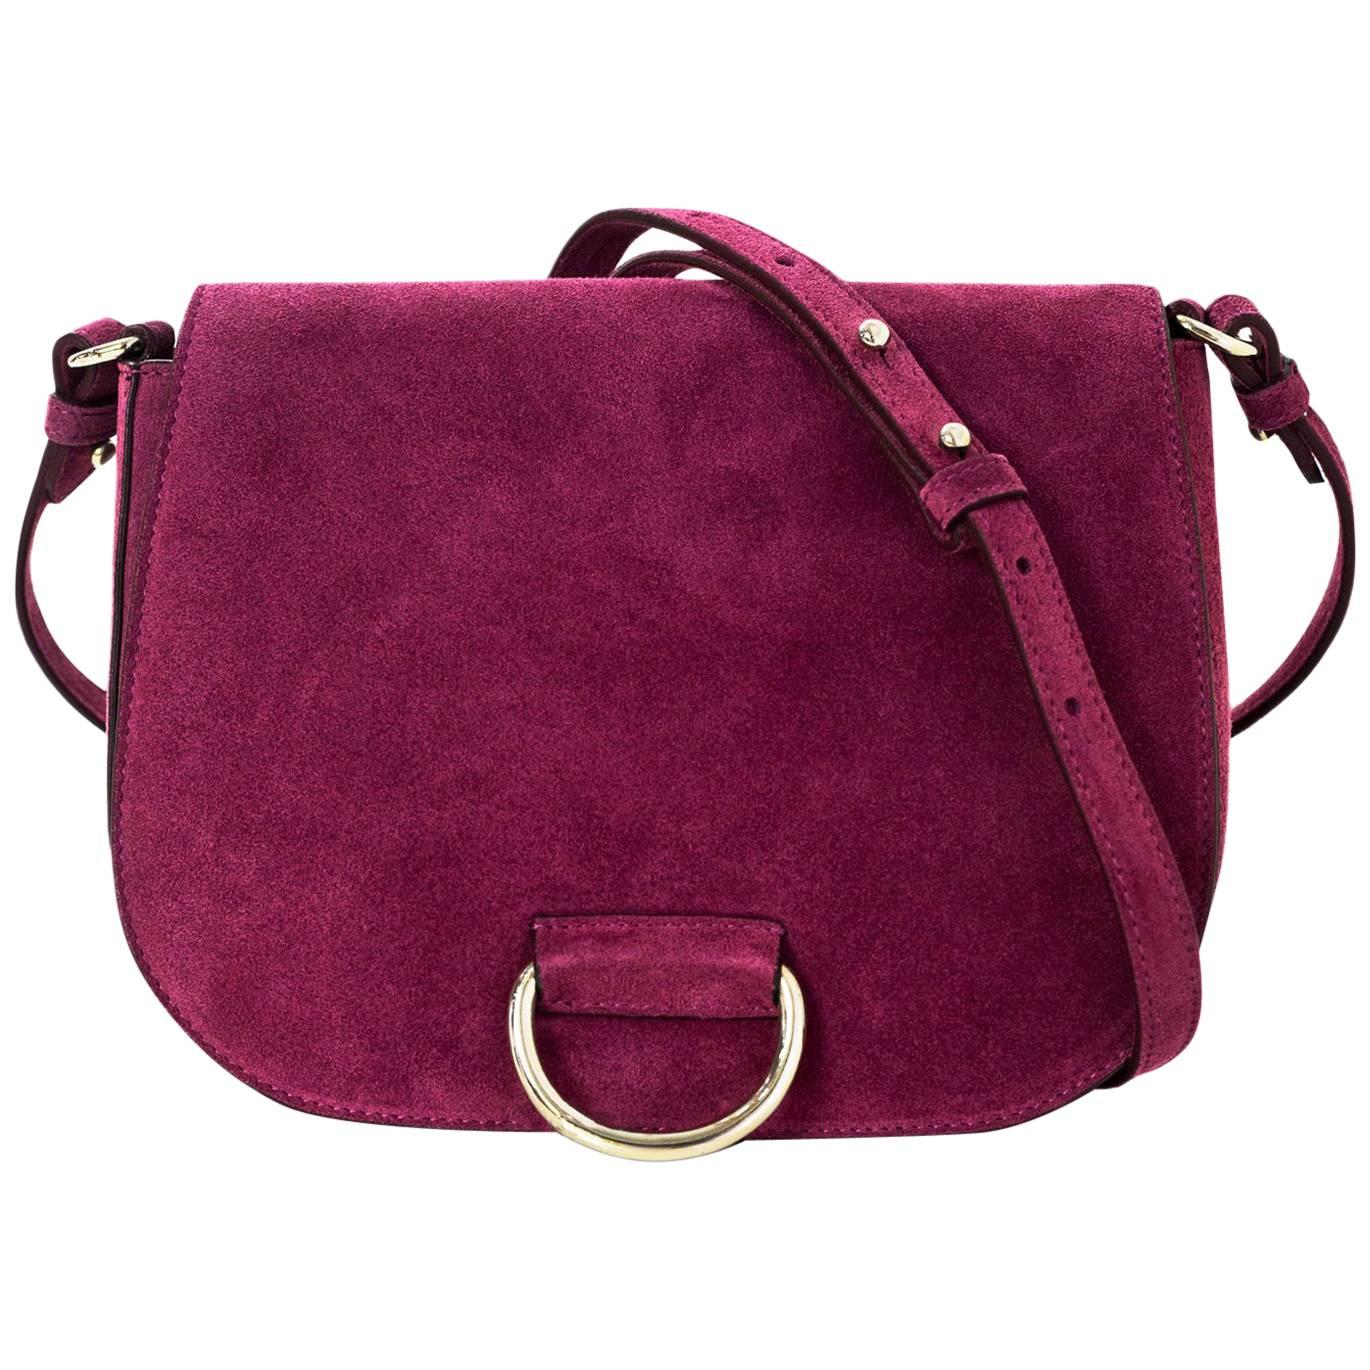 Little Liffner Raspberry Suede Saddle Messenger Bag NWT with DB